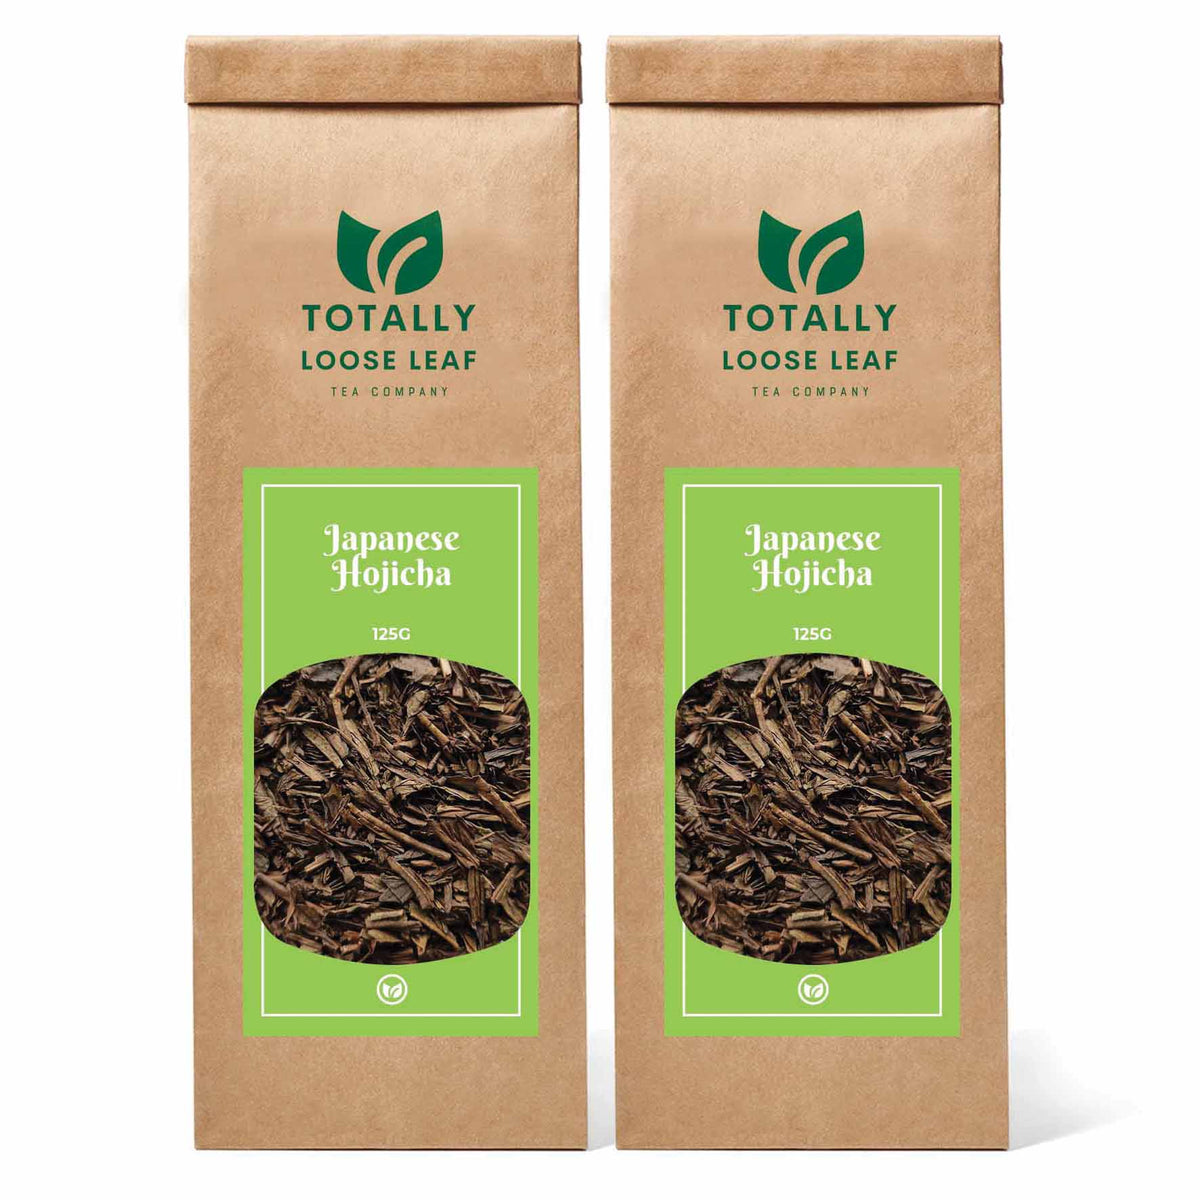 Japanese Hojicha Green Loose Leaf Tea - two pouches